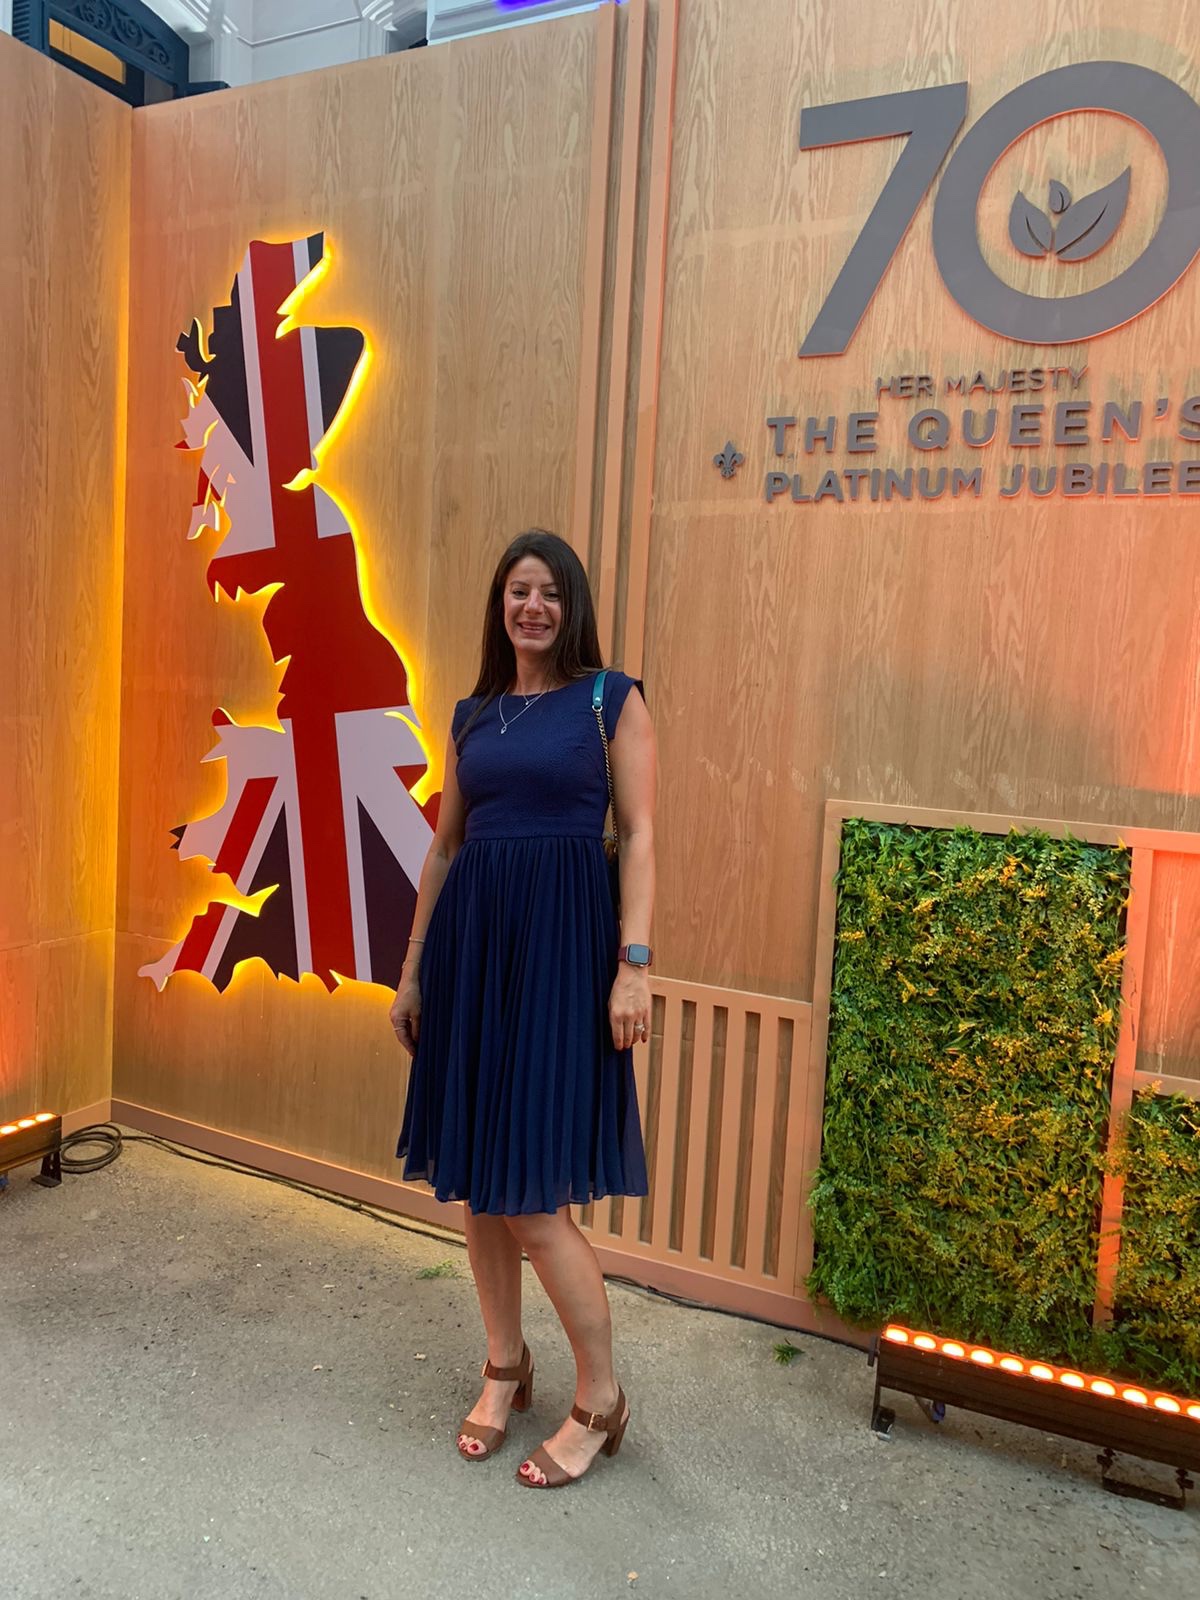 Proudly representing the BSE at the Queen’s Jubilee Celebration at the British Embassy in Cairo!